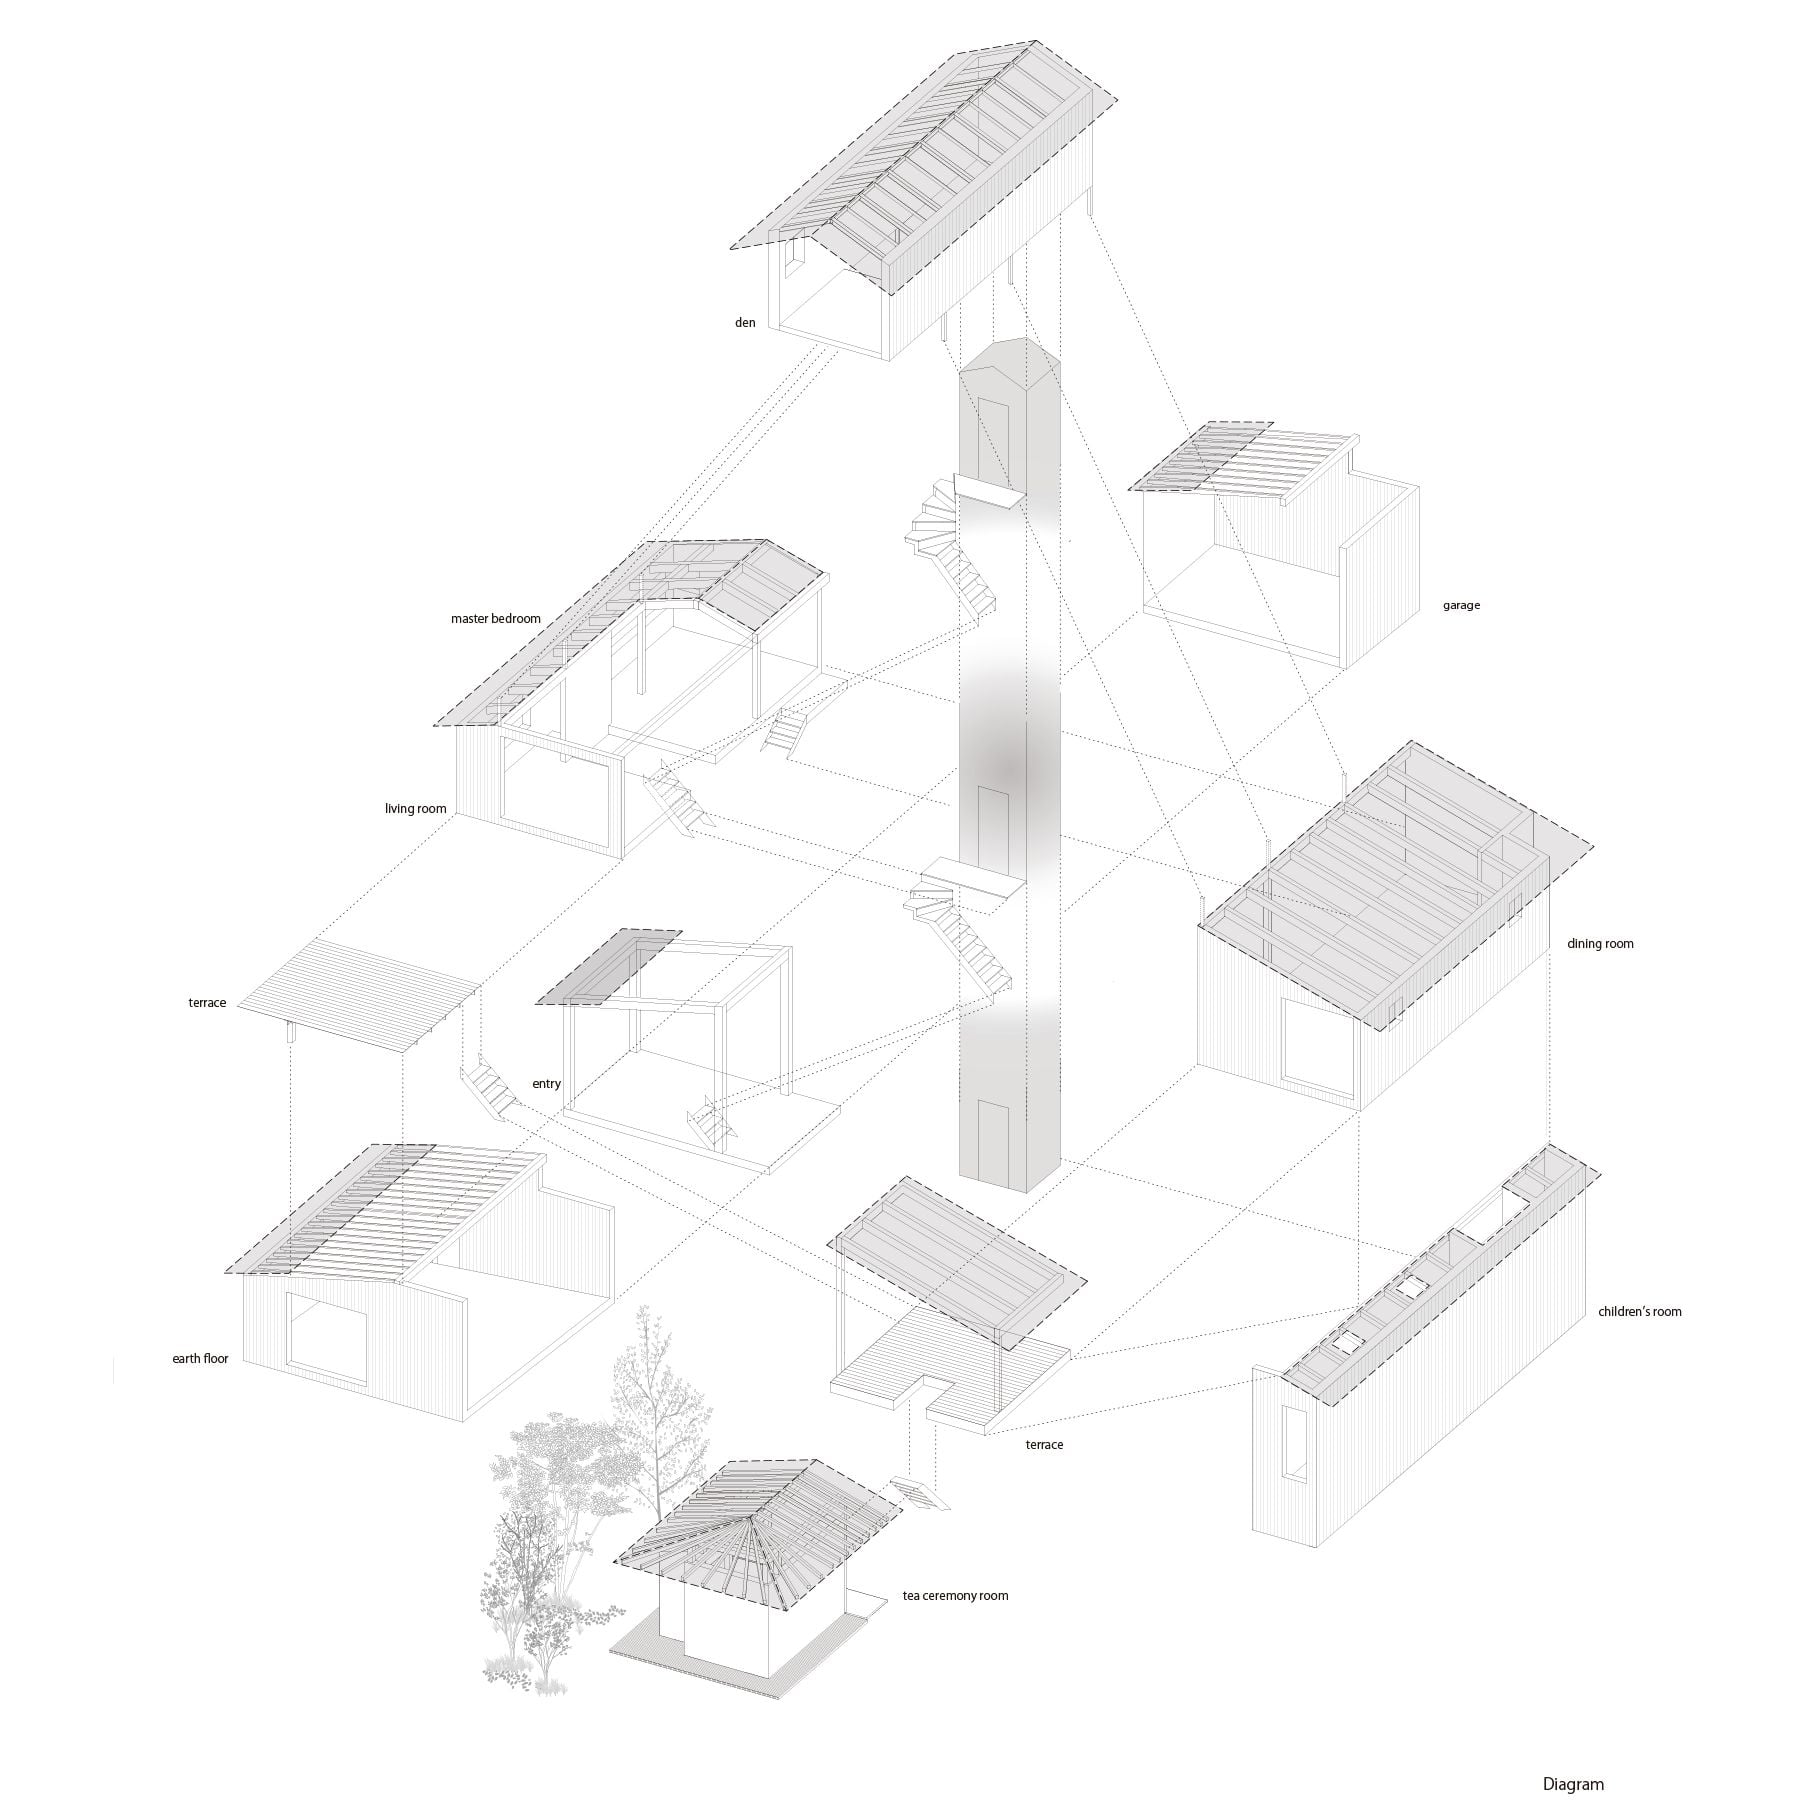 Diagram illustrates how all the pieces of the House in Shimogamo fit together.